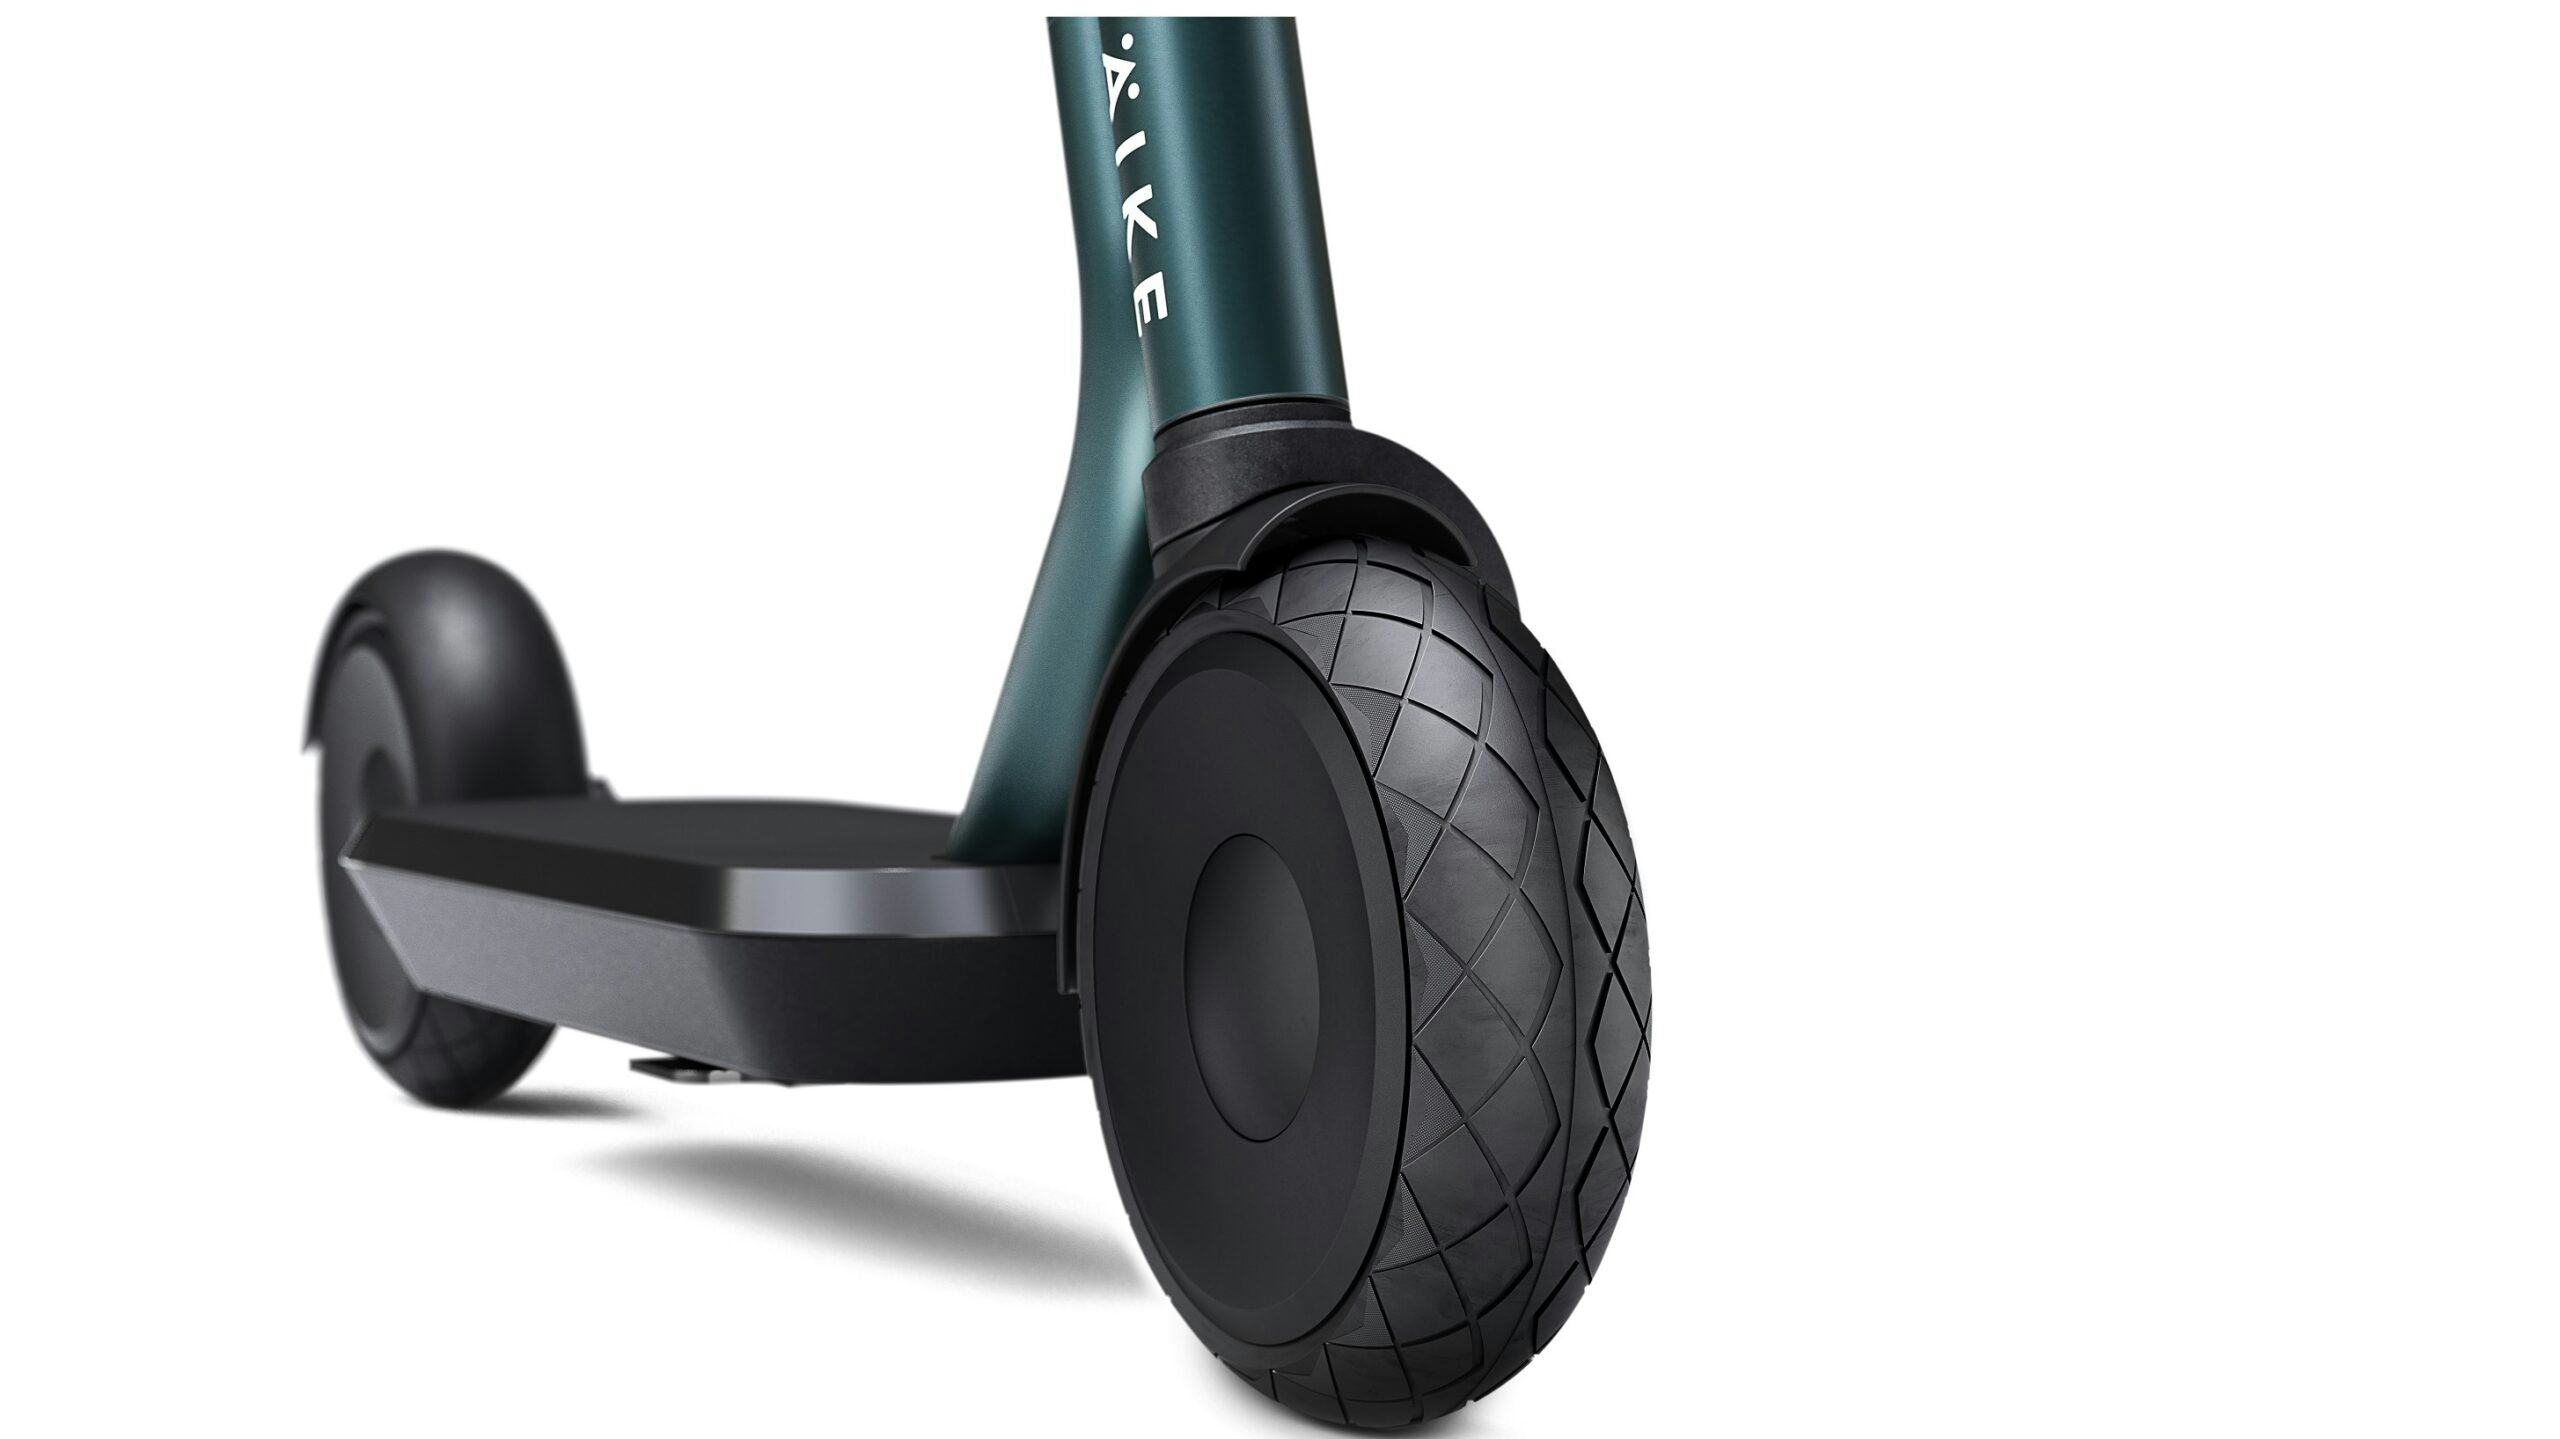 Äike and Comodule developed the Äike T e-scooter with the aim to manufacture and assemble it entirely in Europe. – Photo Äike